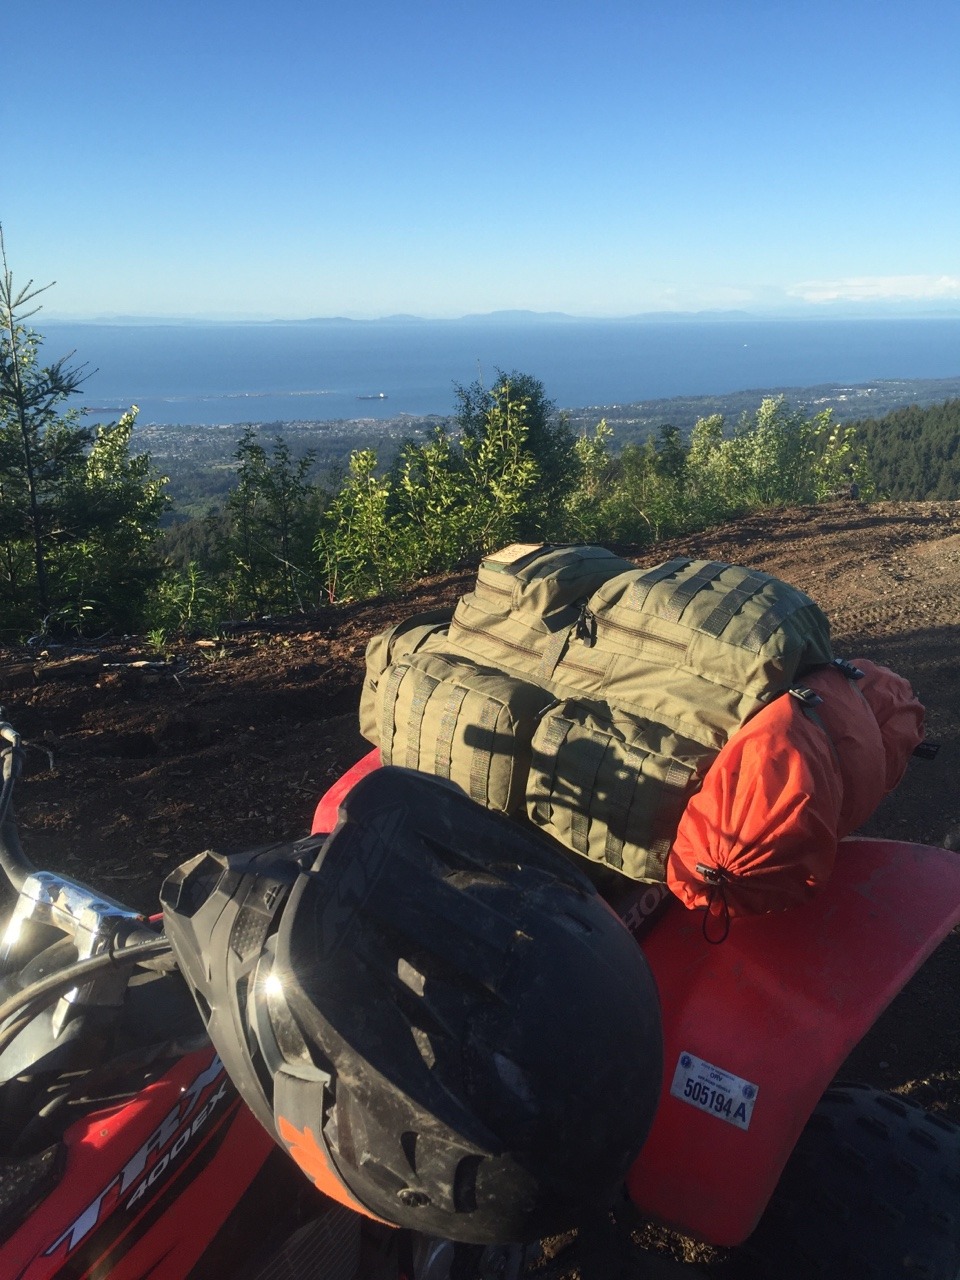 Me and @quadjunky took the quads out and camped at our favorite lookout. Good little